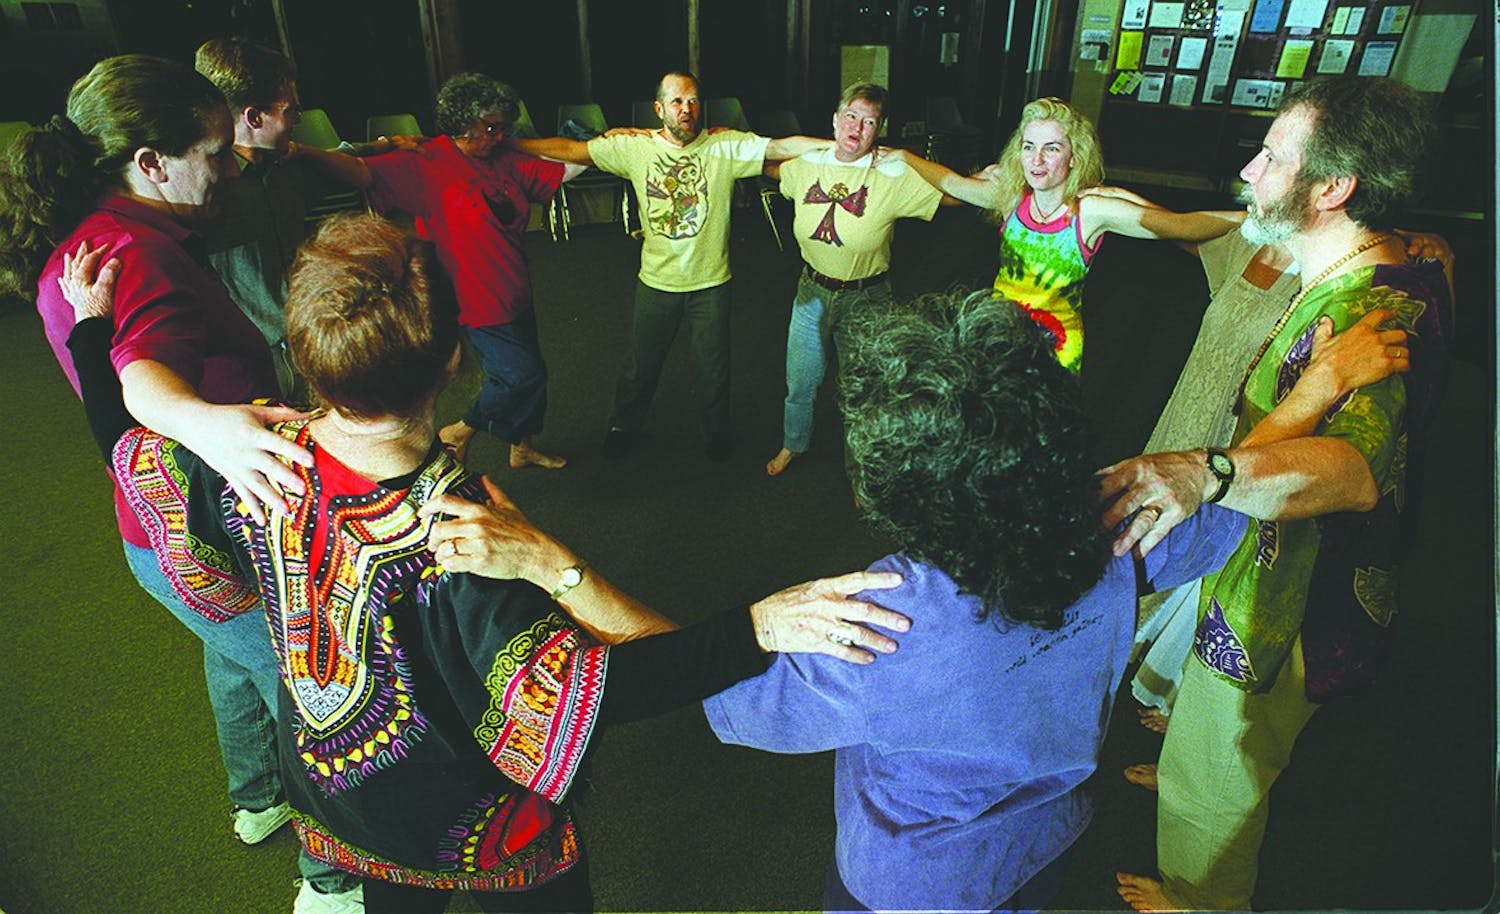 KRT SOUTH STORY SLUGGED: FL-PEACE KRT PHOTOGRAPH BY BRUCE BREWER/TALLAHASSEE DEMOCRAT (KRTS101- March 22) Bismallah is a muslim dance done in a circle. Universal peace dancing allows people of all religions to get together to hold hands, dance, sing, chant and enjoy communion with others. (TA) PL KD 2000 (Horiz) (lde)